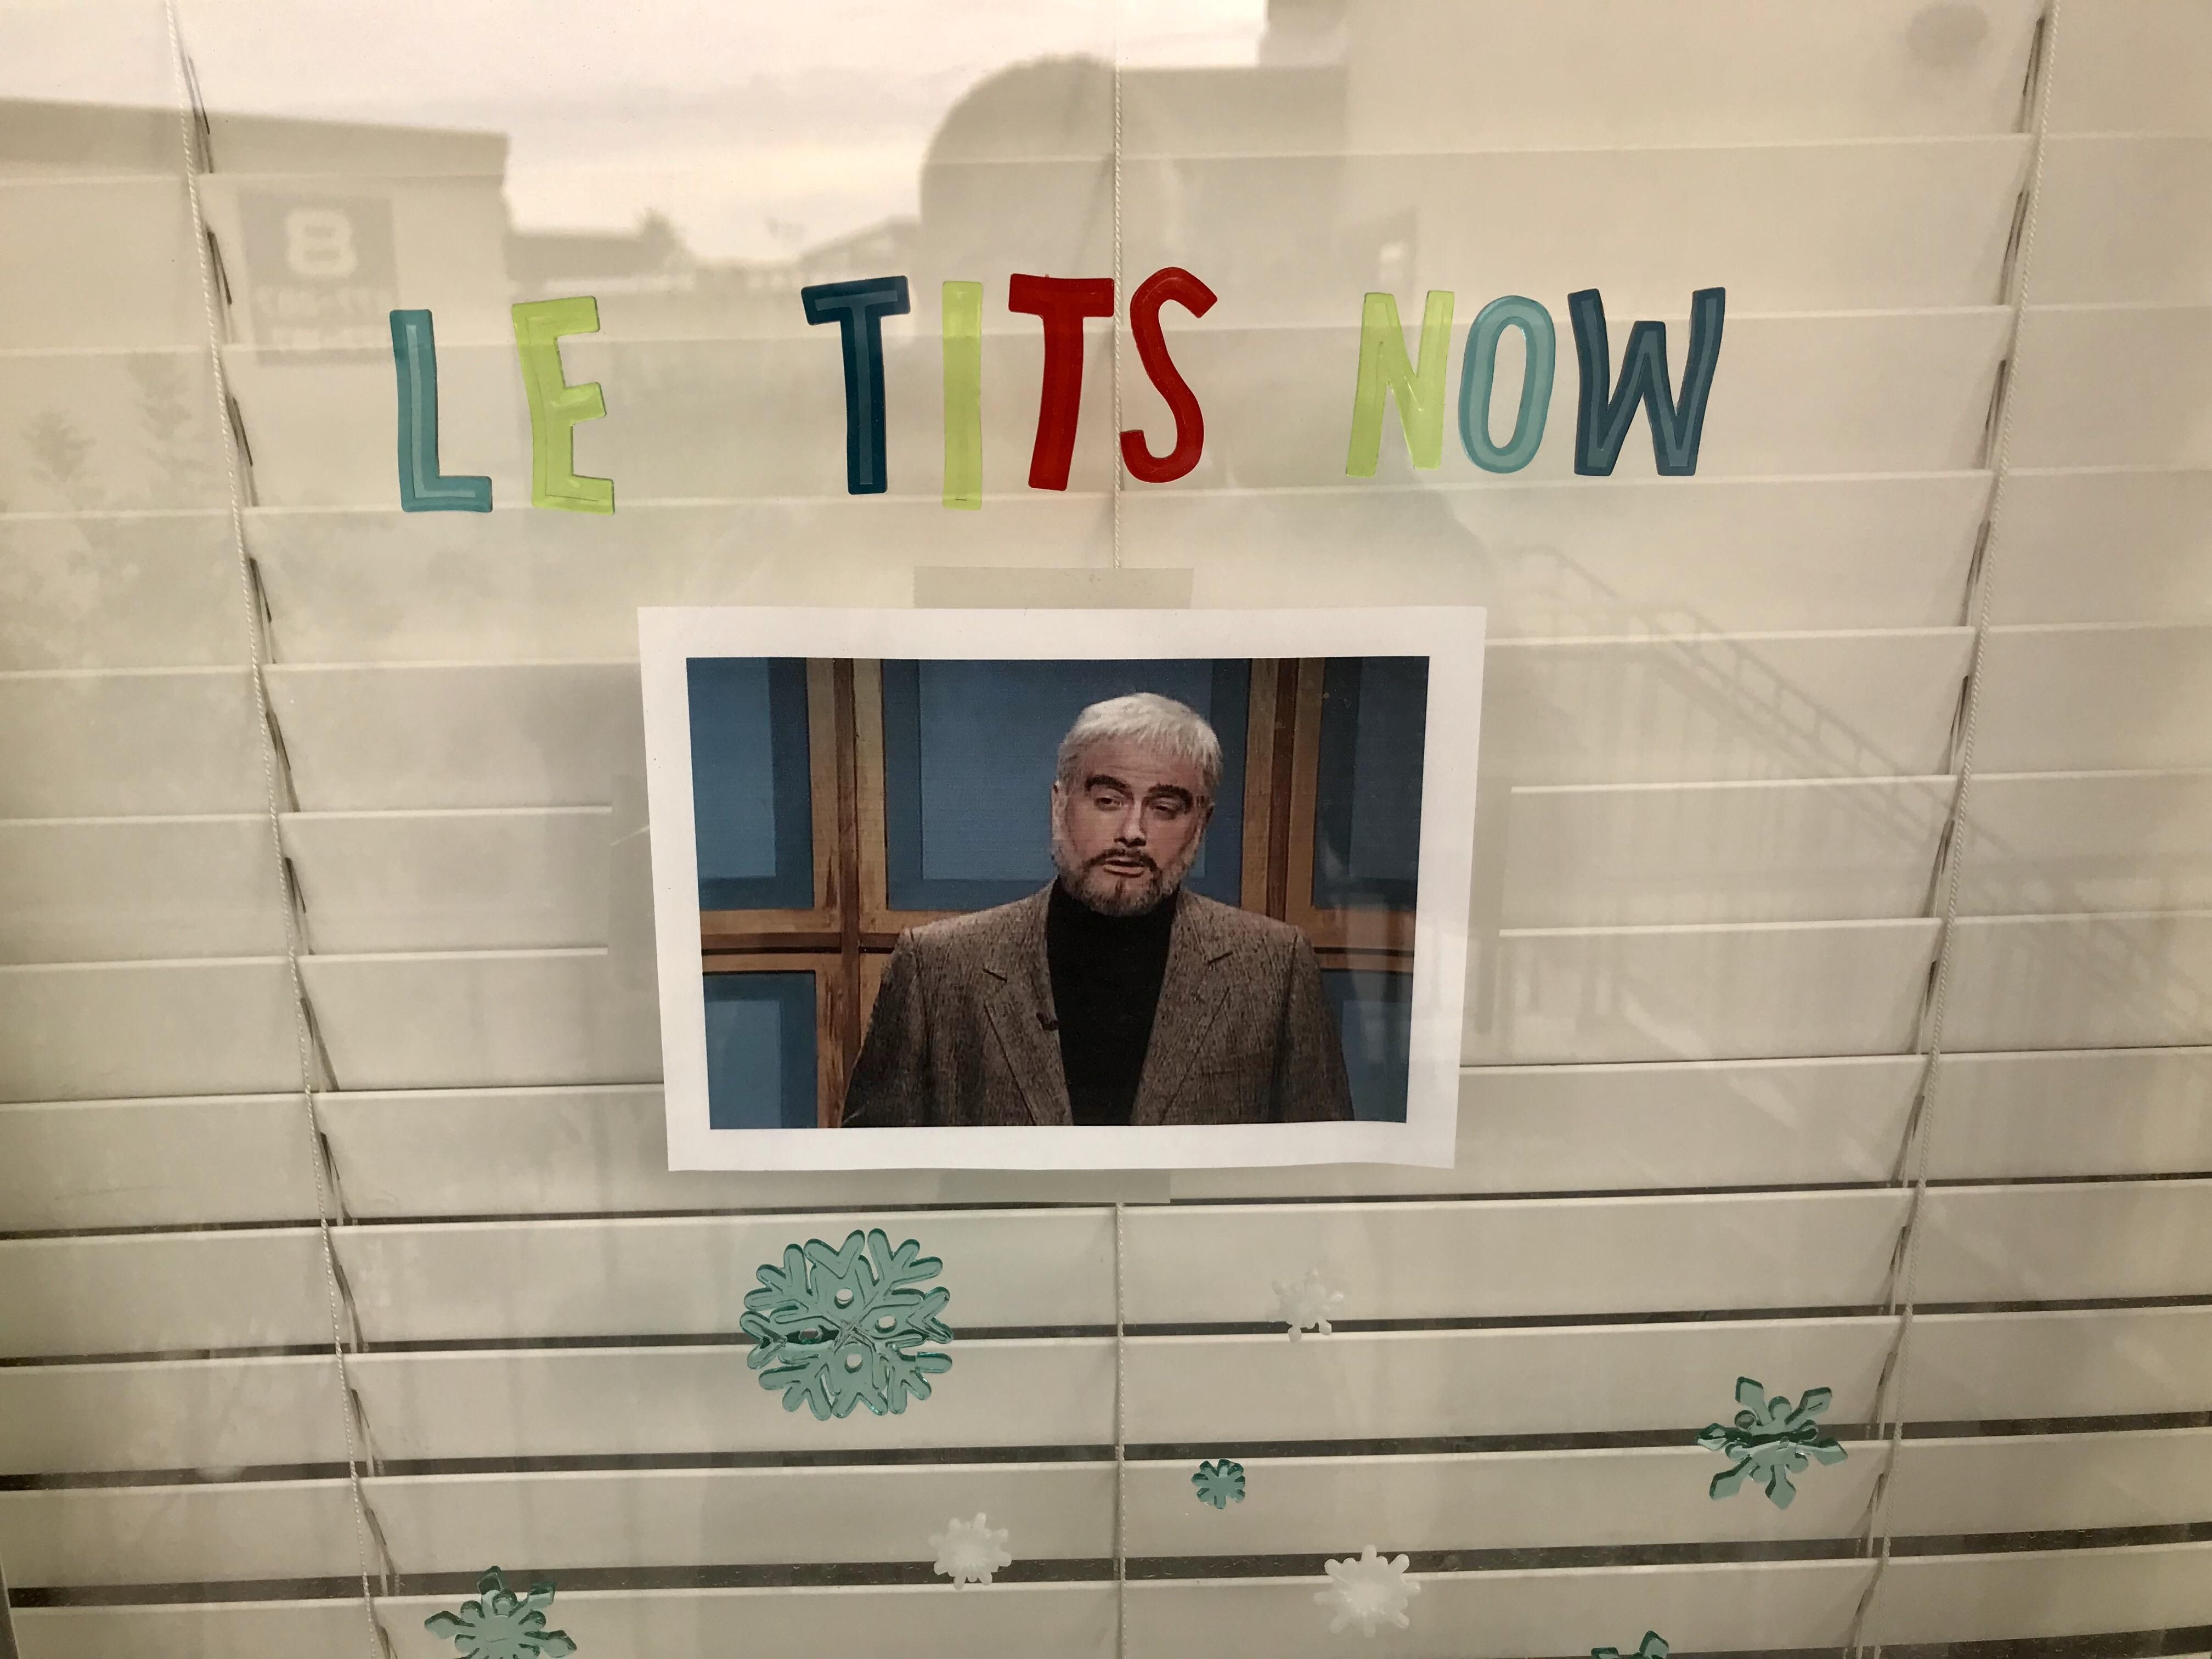 My girlfriend let me decorate our apartment’s front window for Christmas. She may have made a mistake.